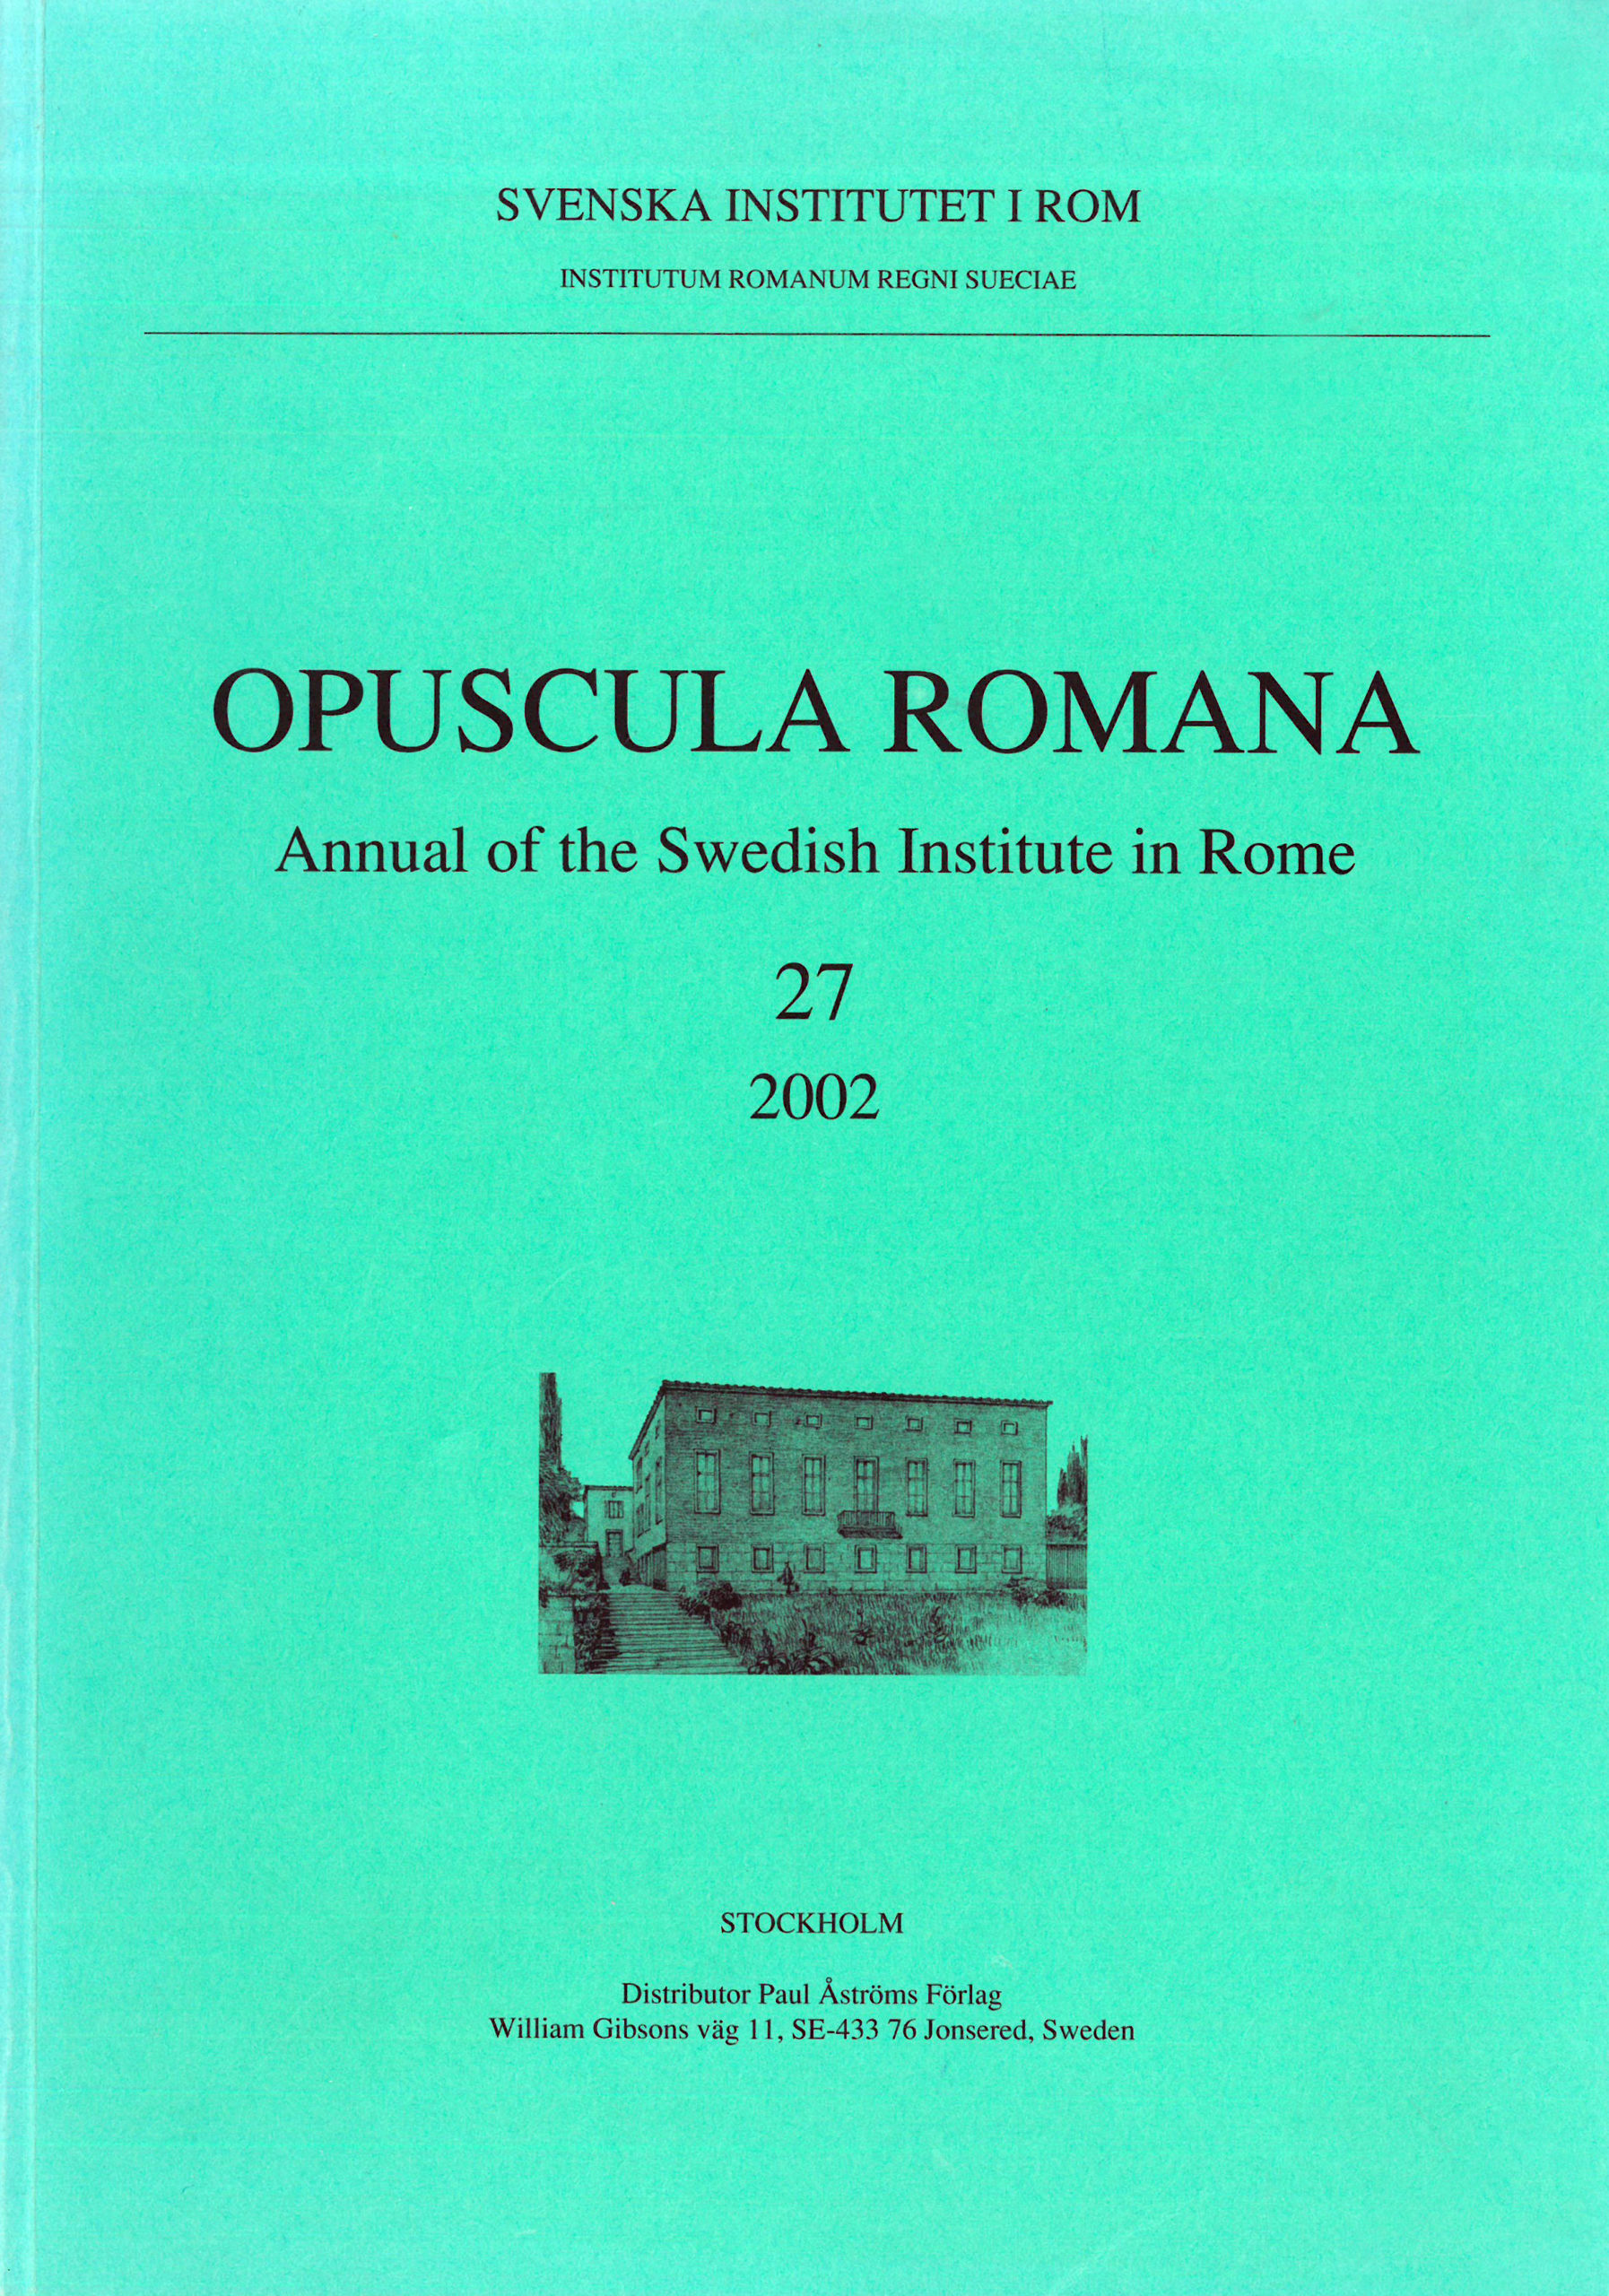 Front cover of Opuscula Romana. Annual of the Swedish Institute in Rome (OpRom) 27, Stockholm 2002. ISSN: 0471-7309. ISBN: 91-7042-166-8. Softcover, 138 pages.